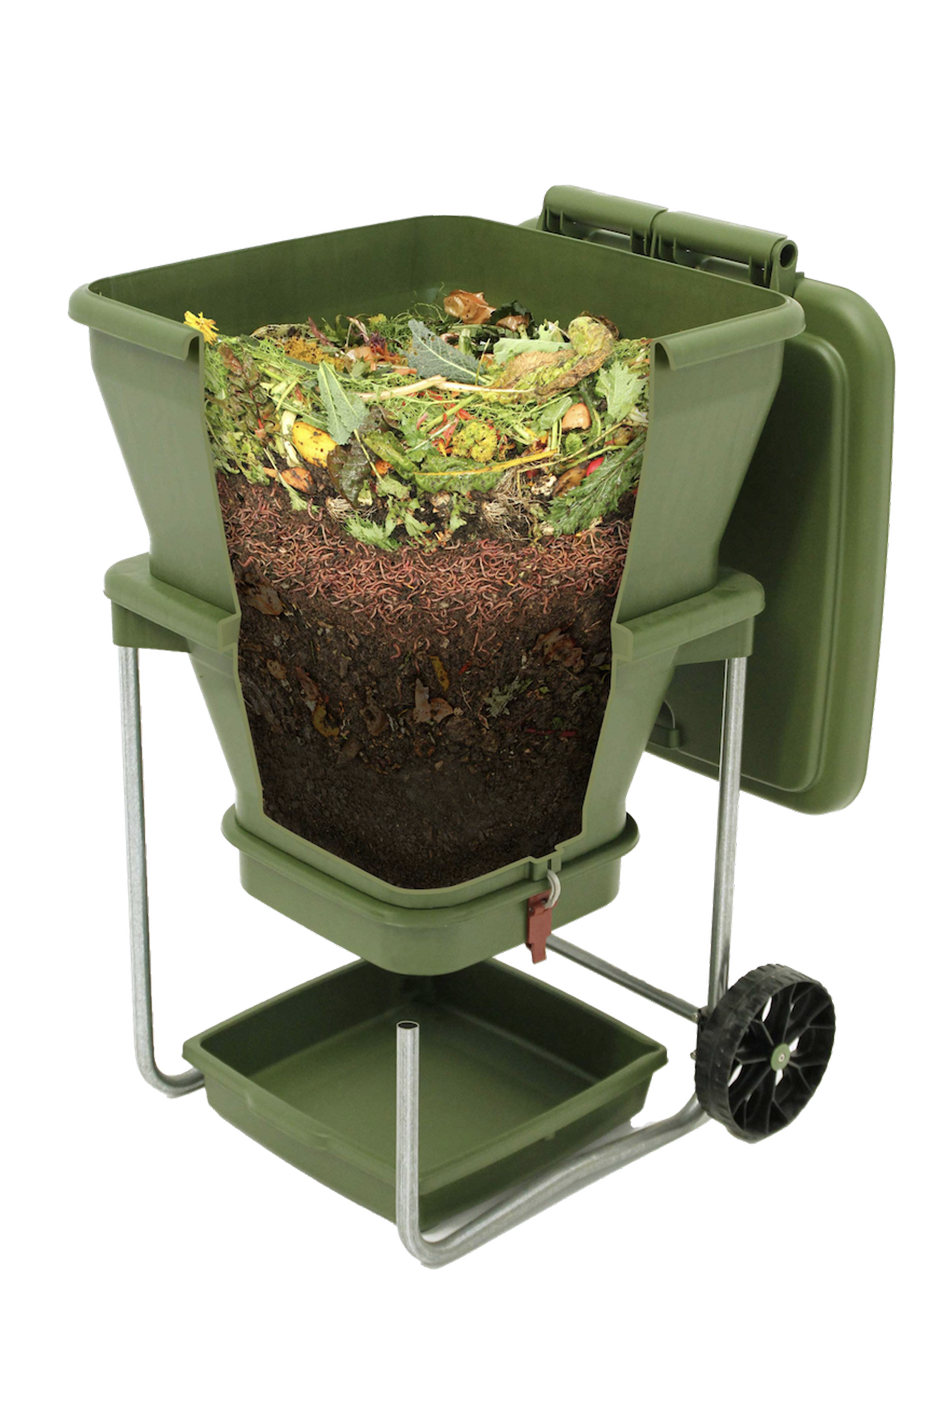 Hungry Bin Composter